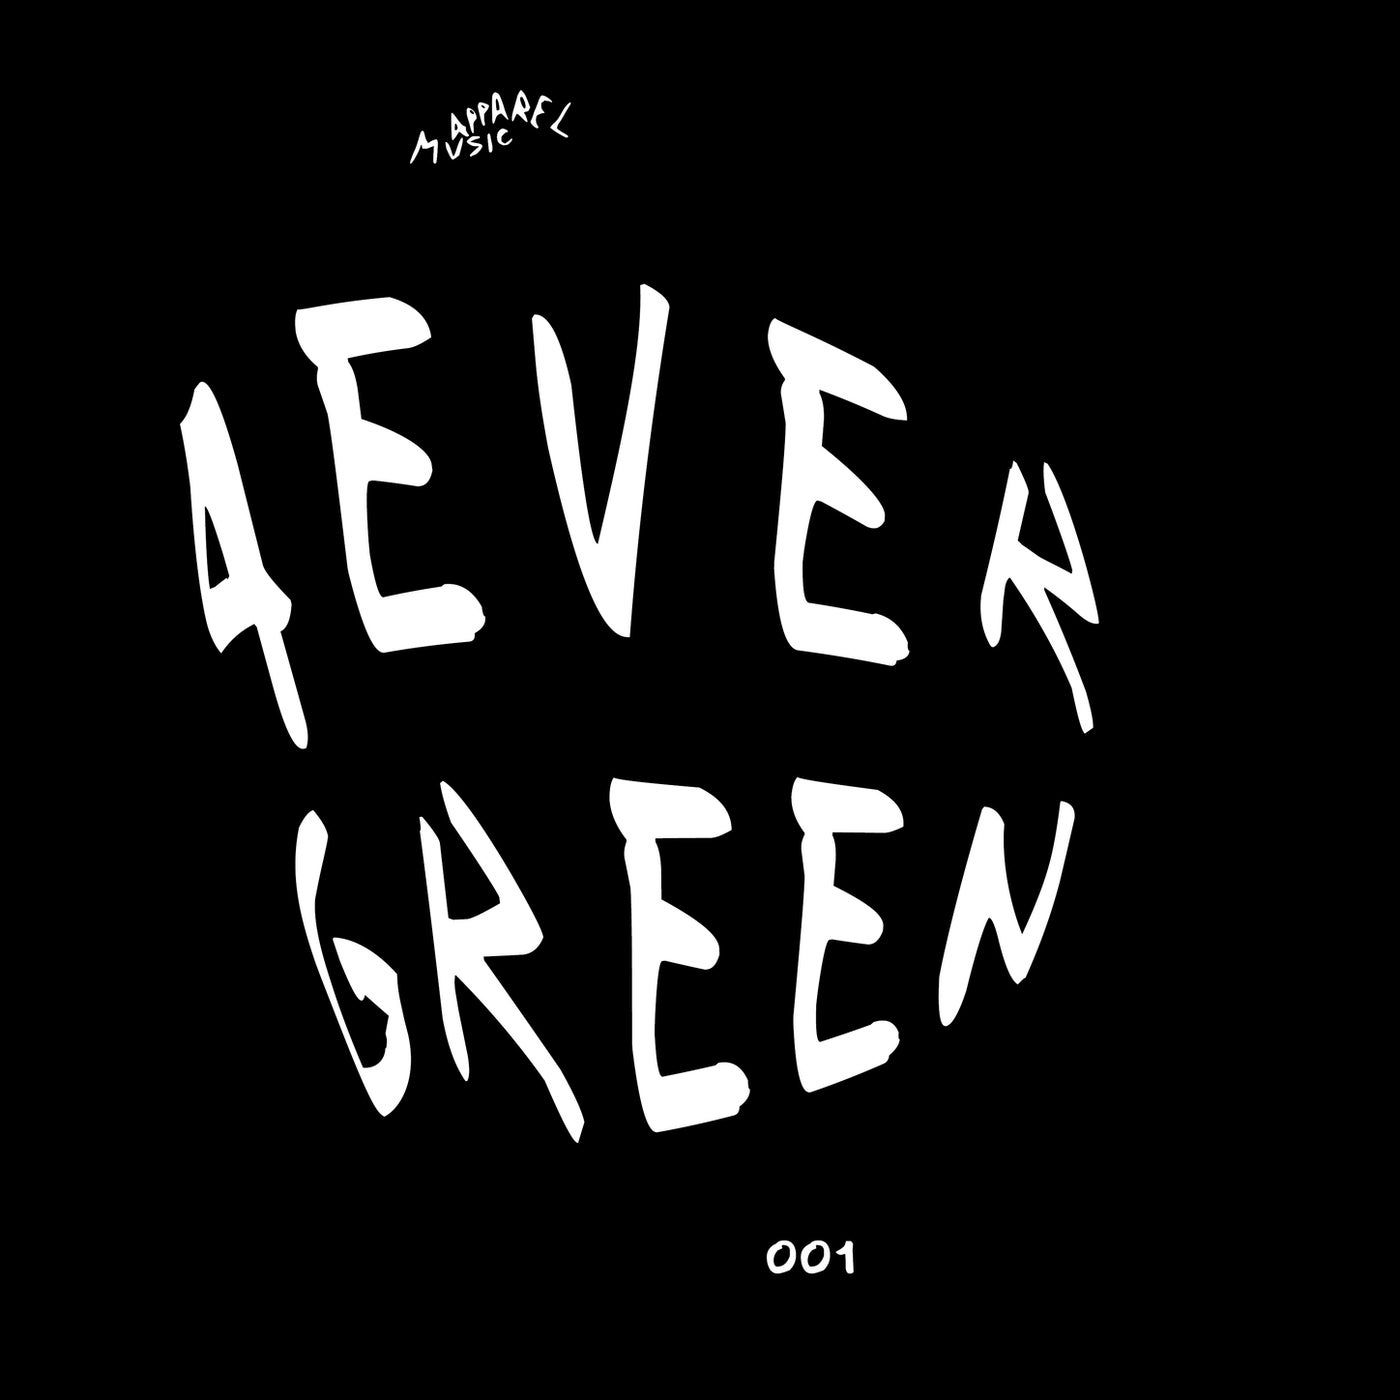 Download 4evergreen 001 on Electrobuzz